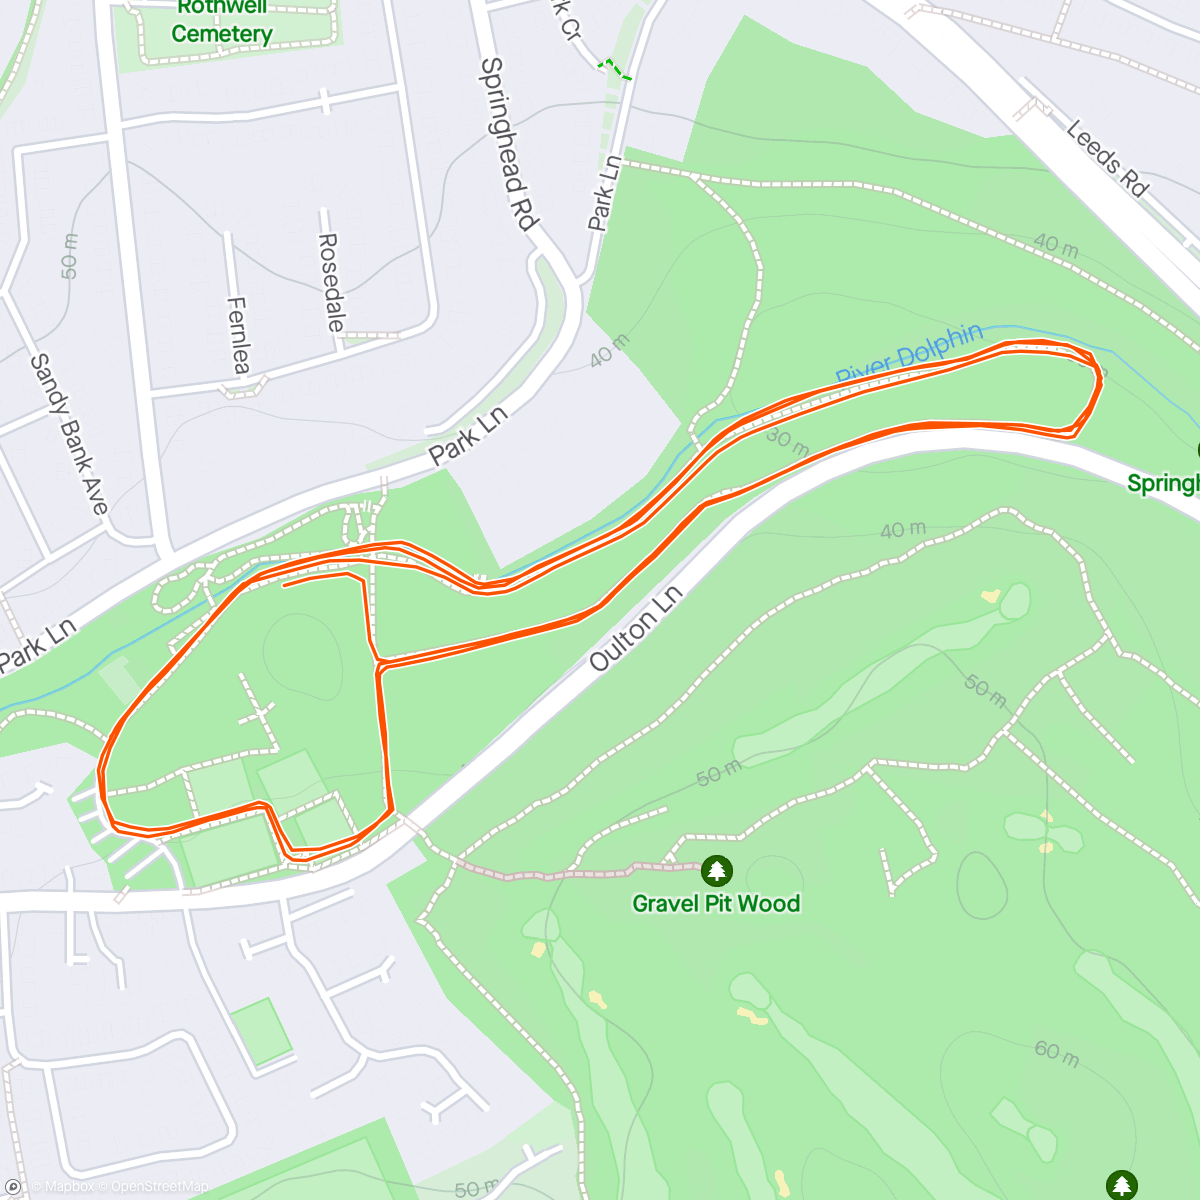 Map of the activity, Rothwell parkrun with noah